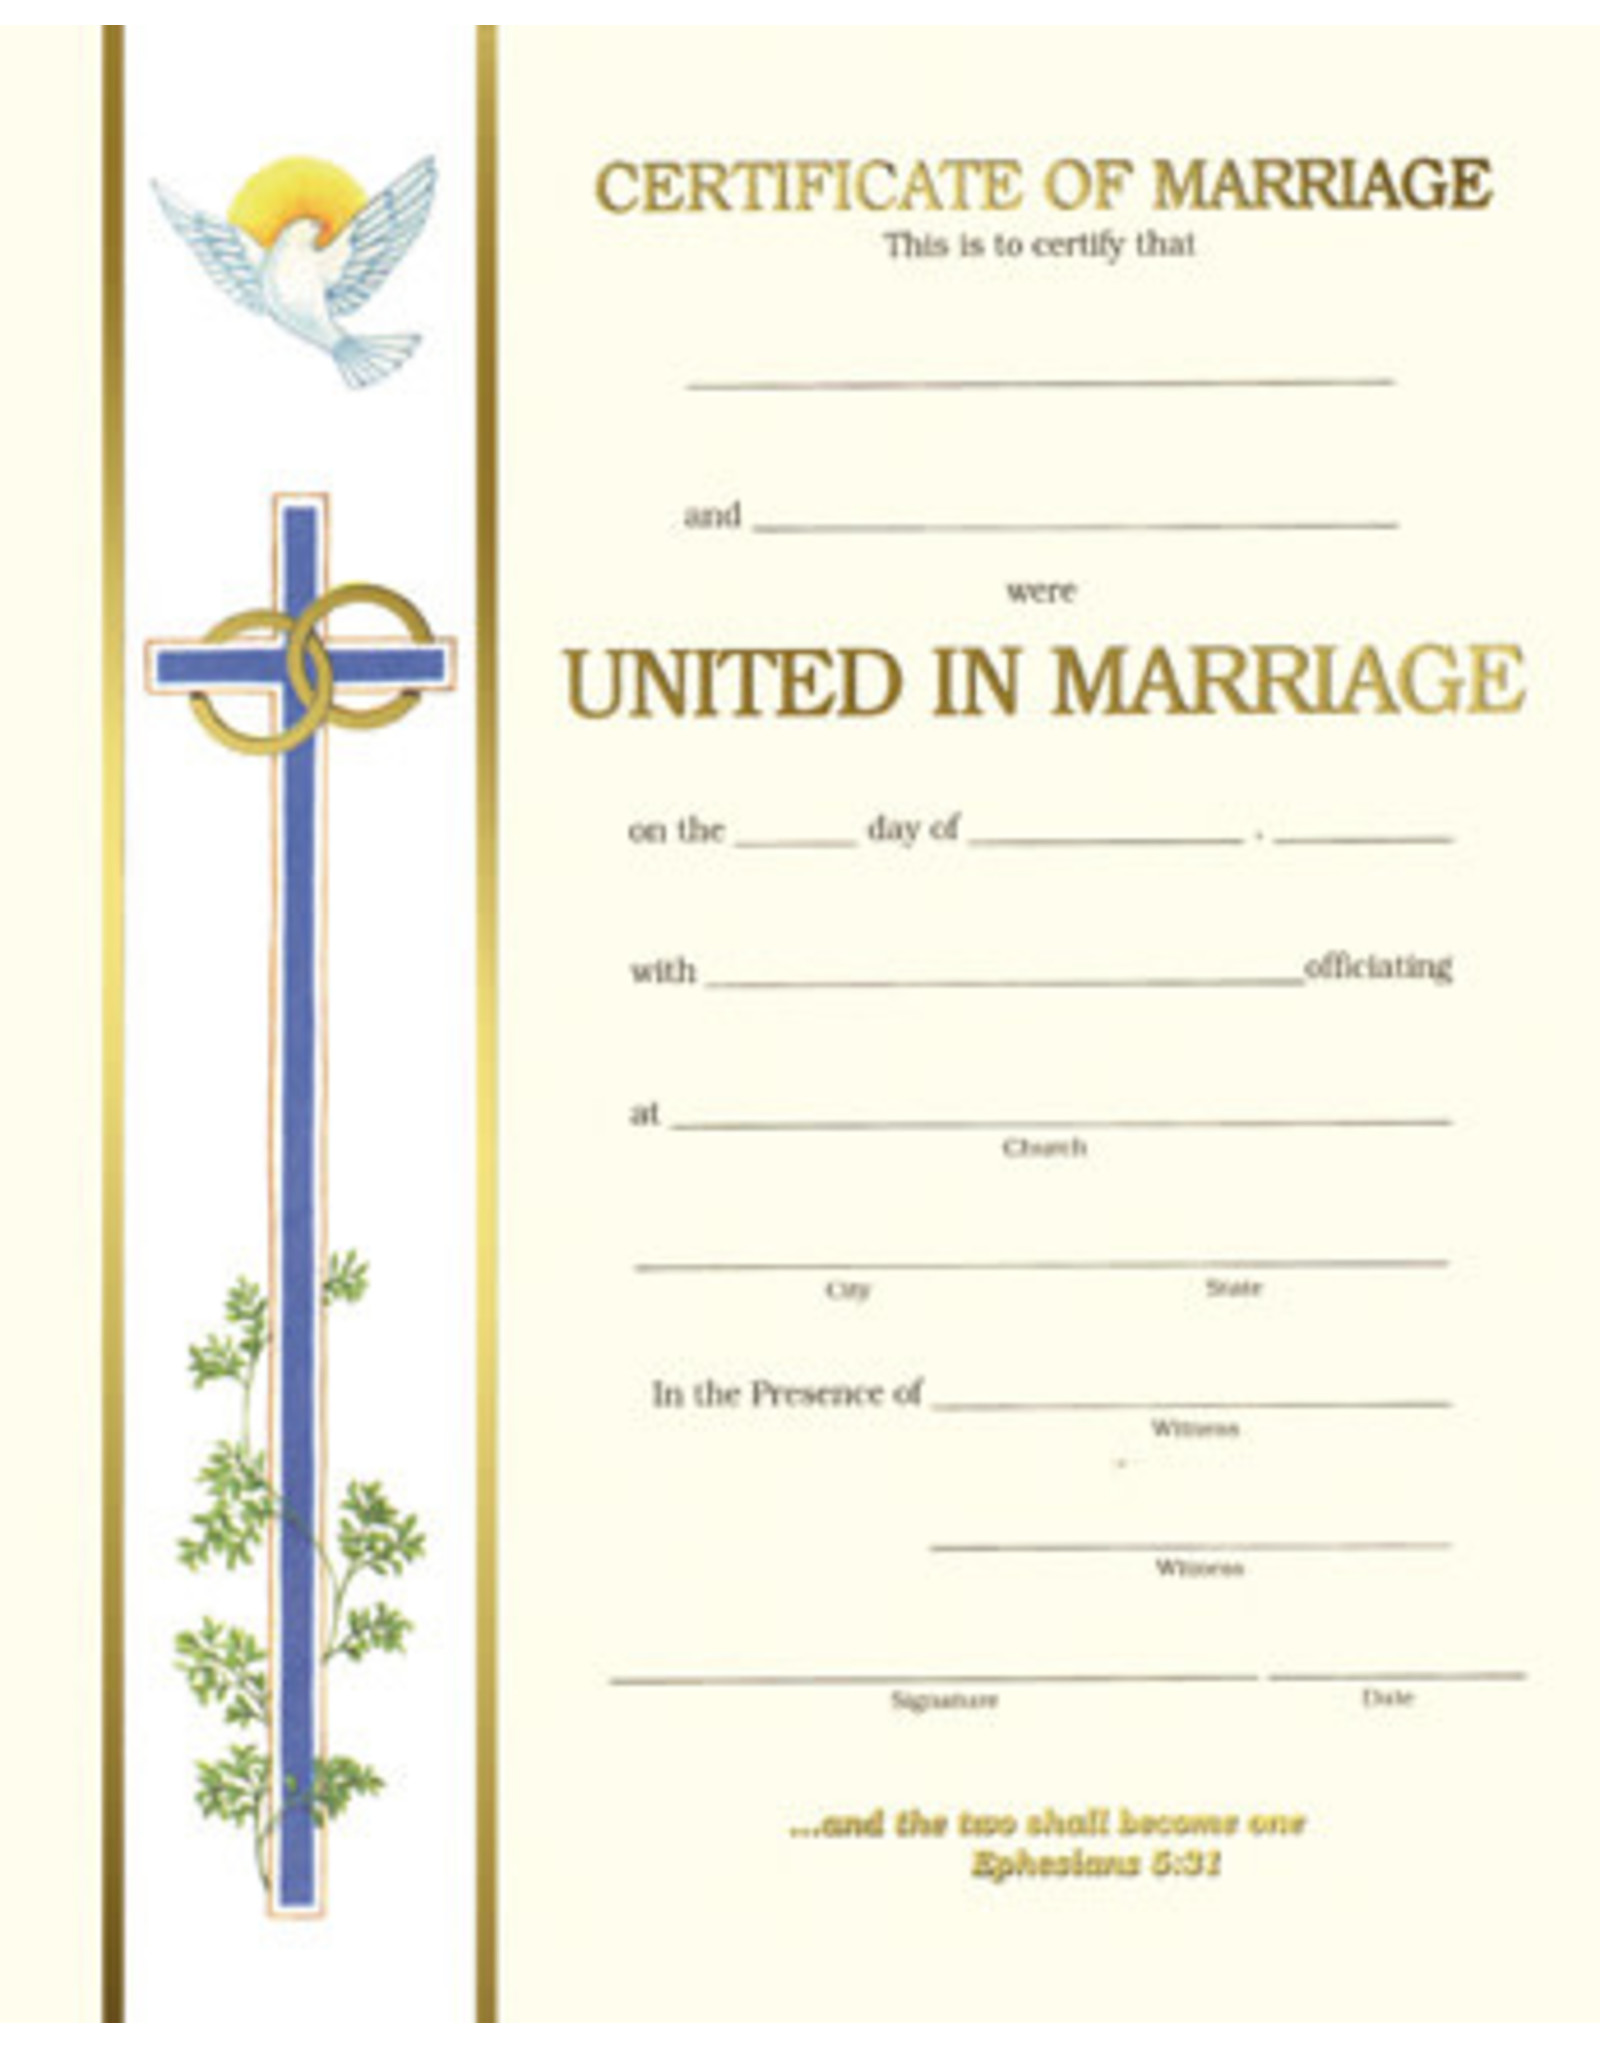 Marriage Certificate (50)